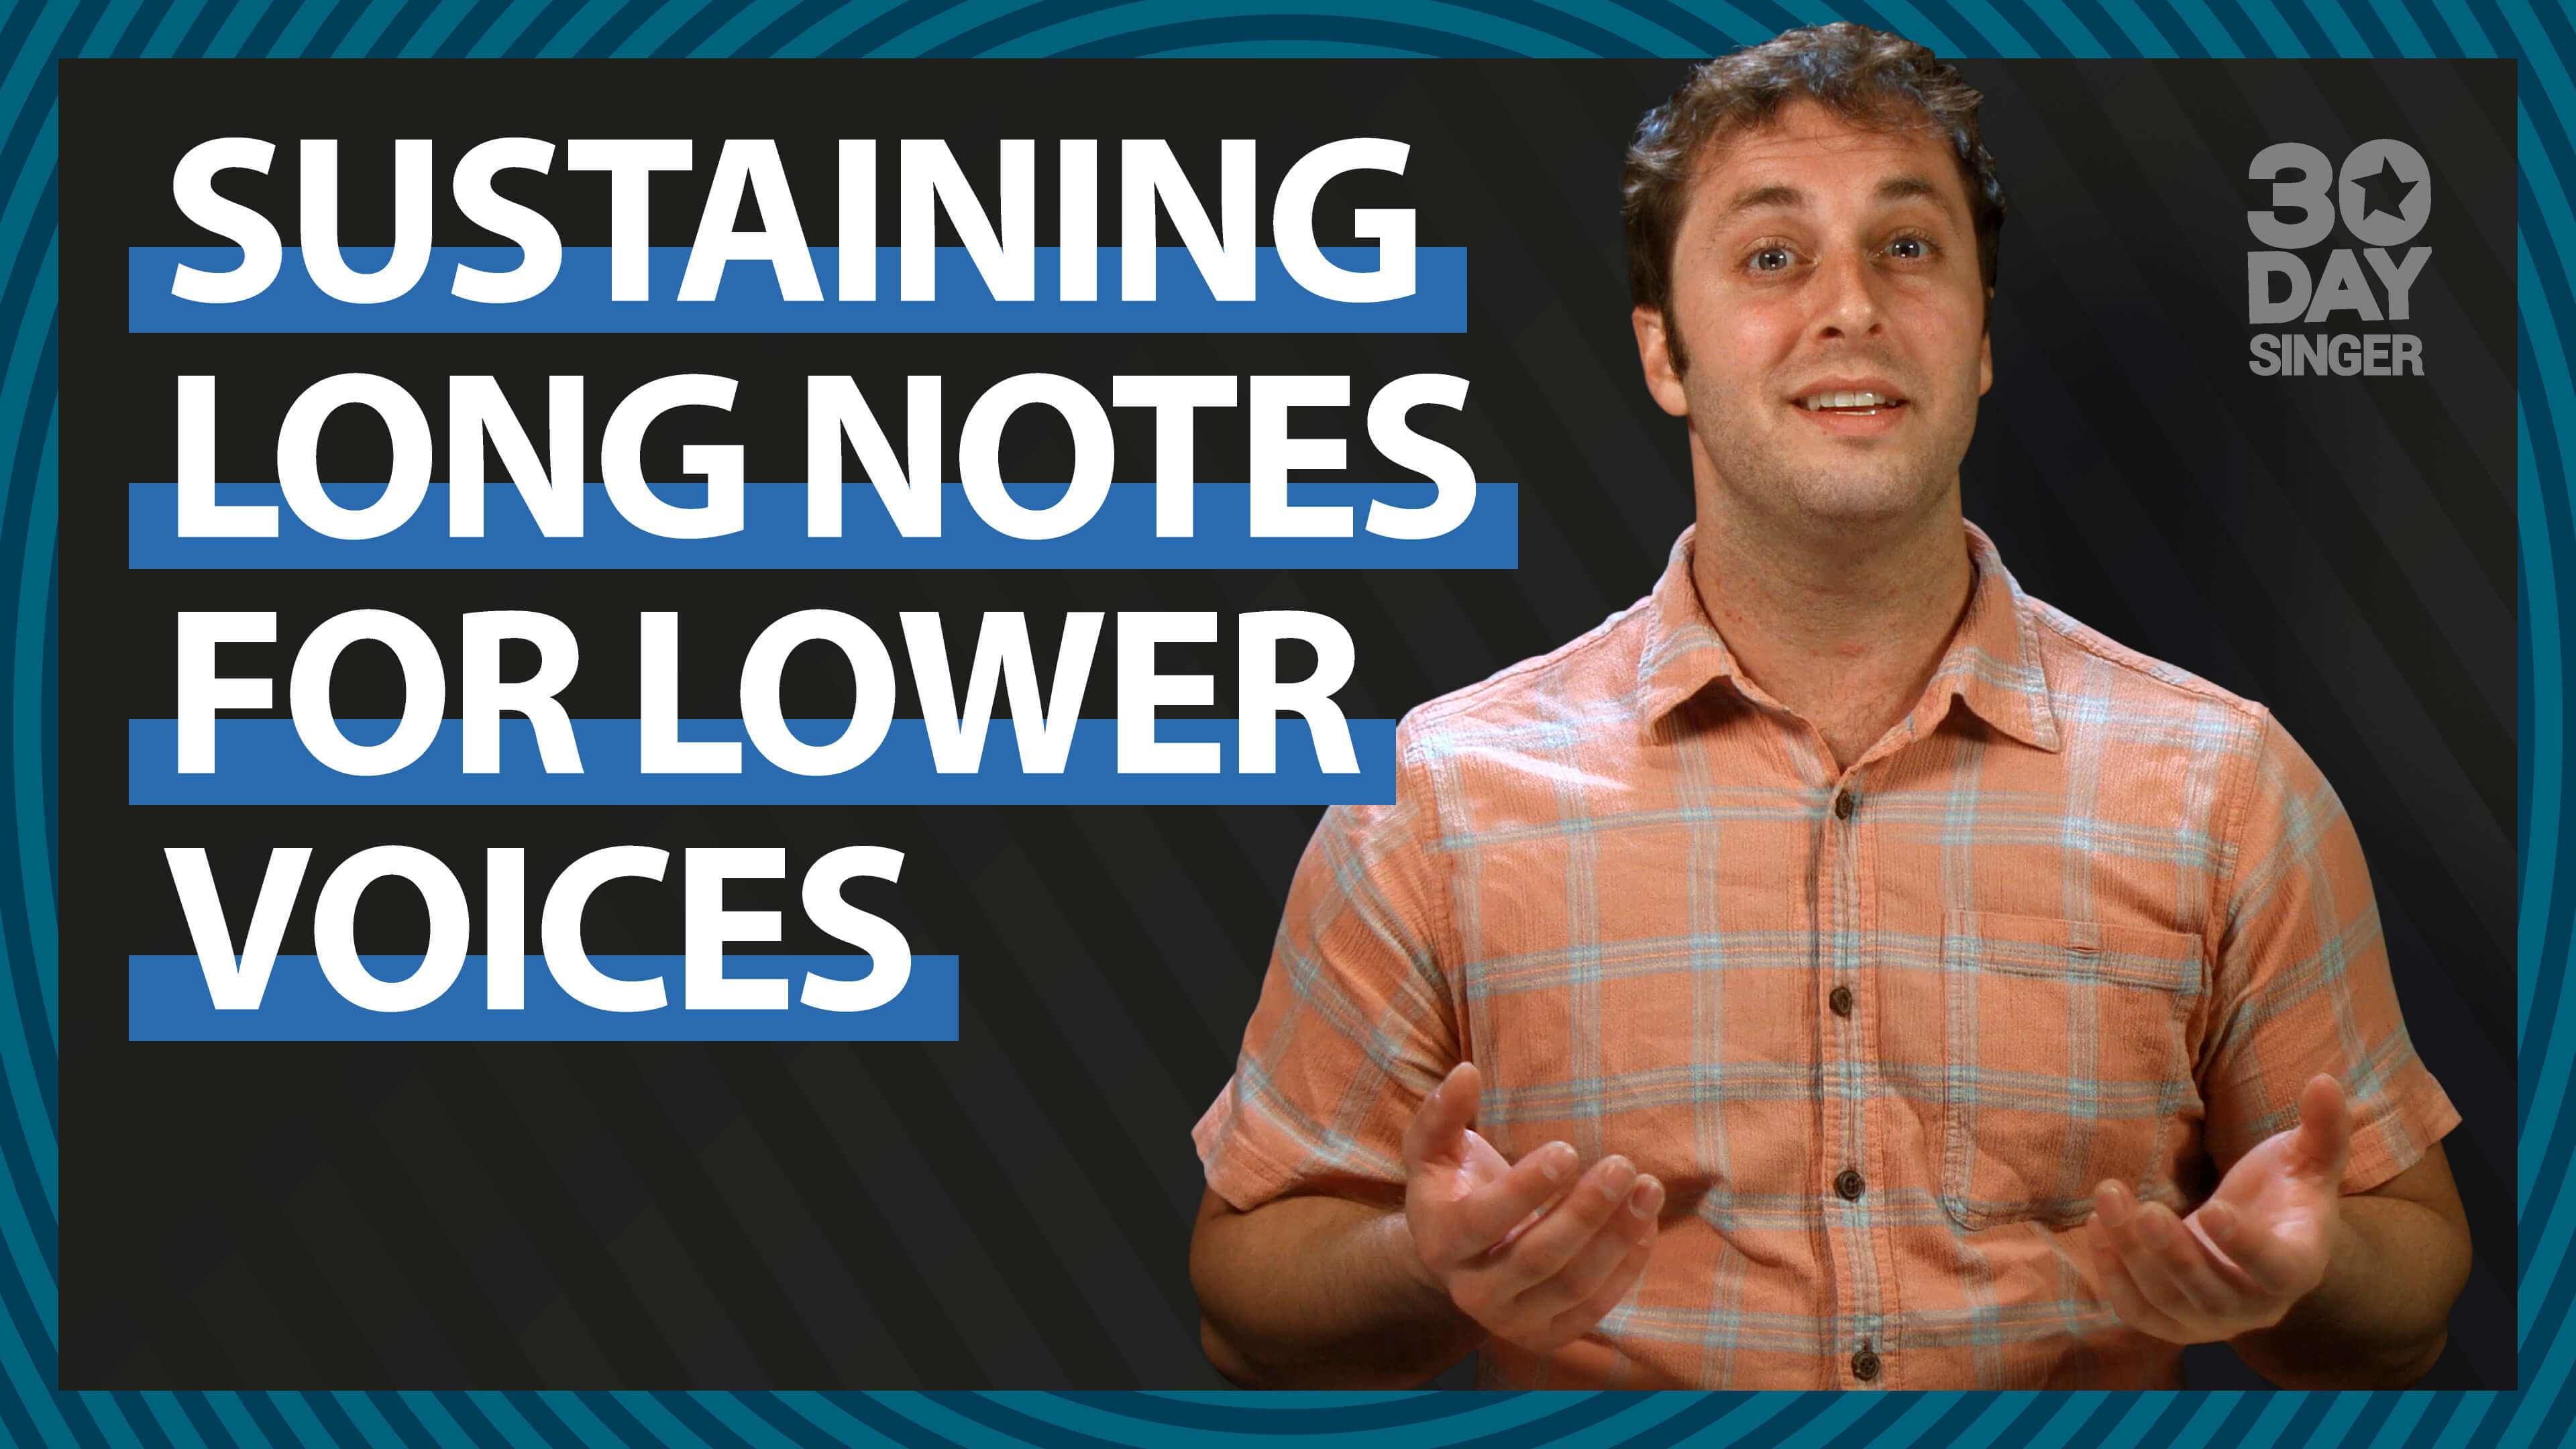 Sustaining Long Notes For Lower Voices